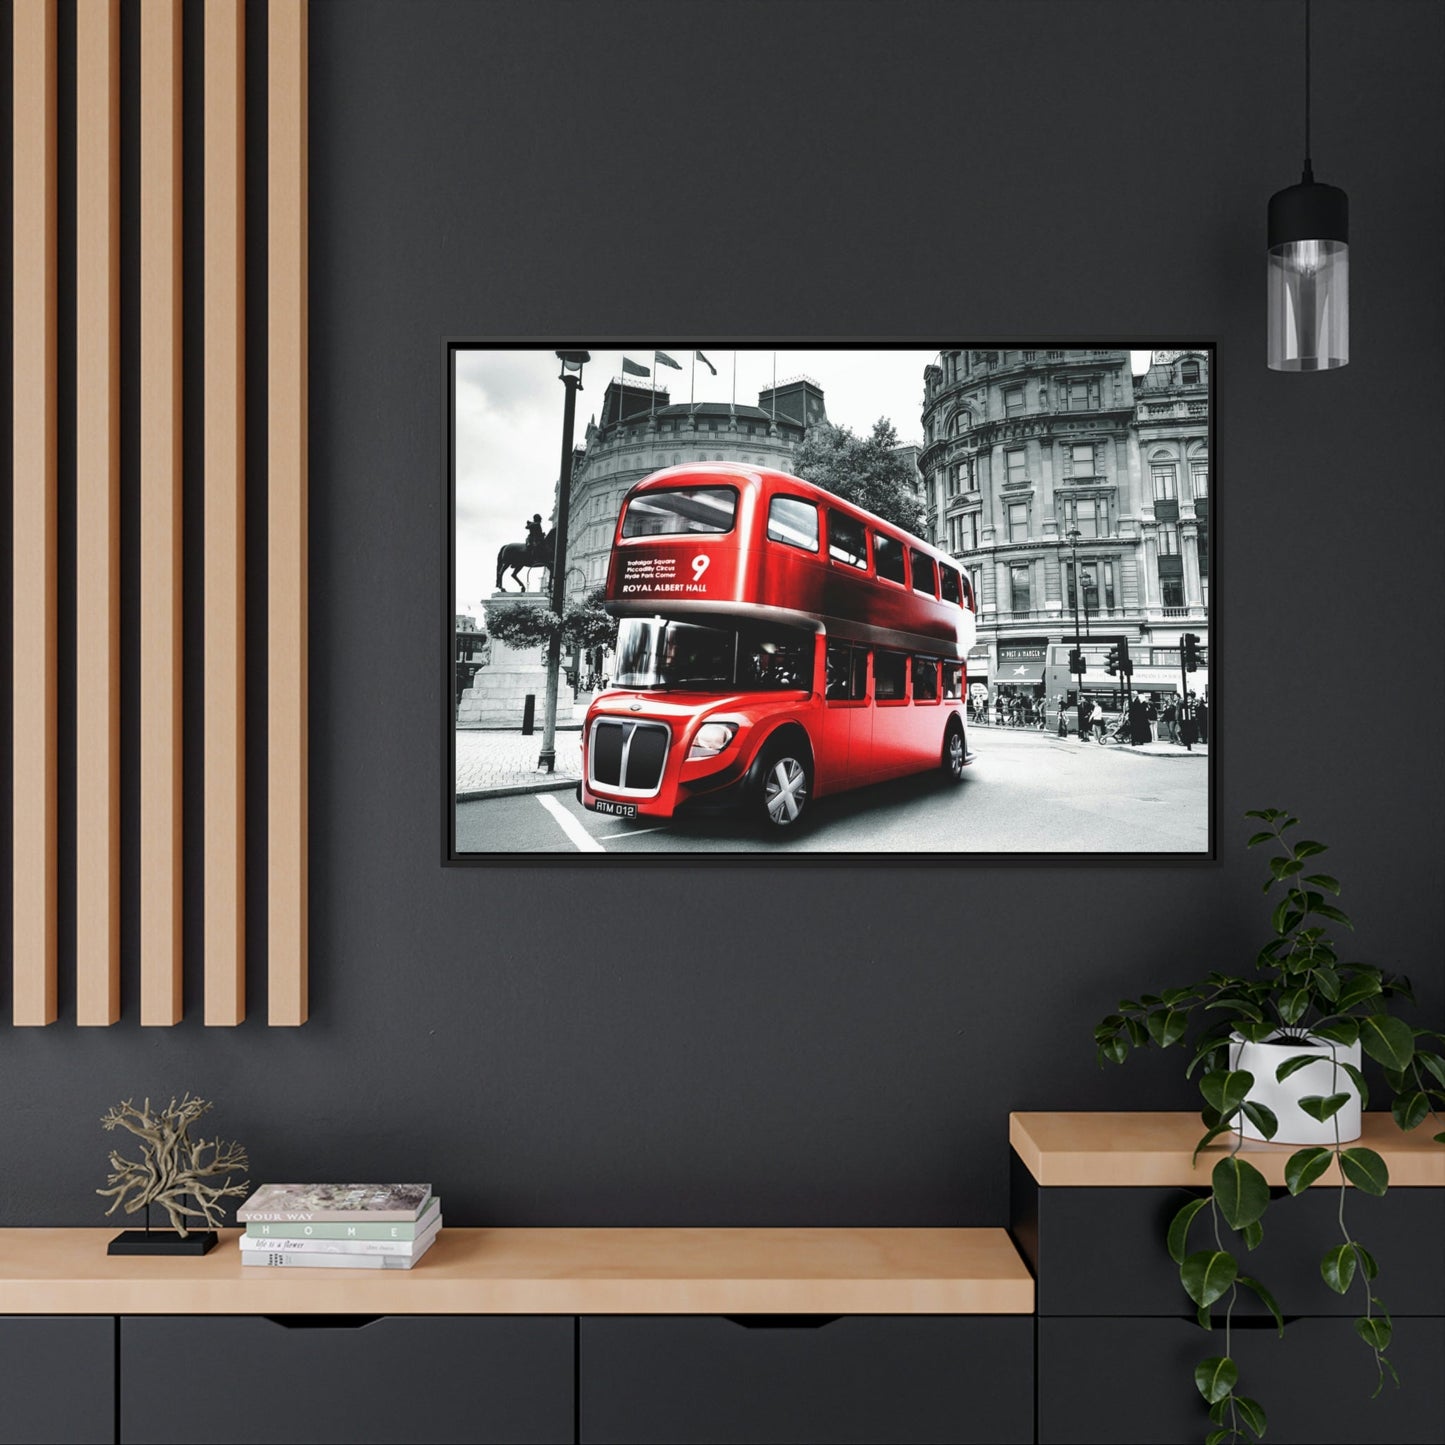 Colorful Routes: Framed Poster showcasing a Vibrant Bus